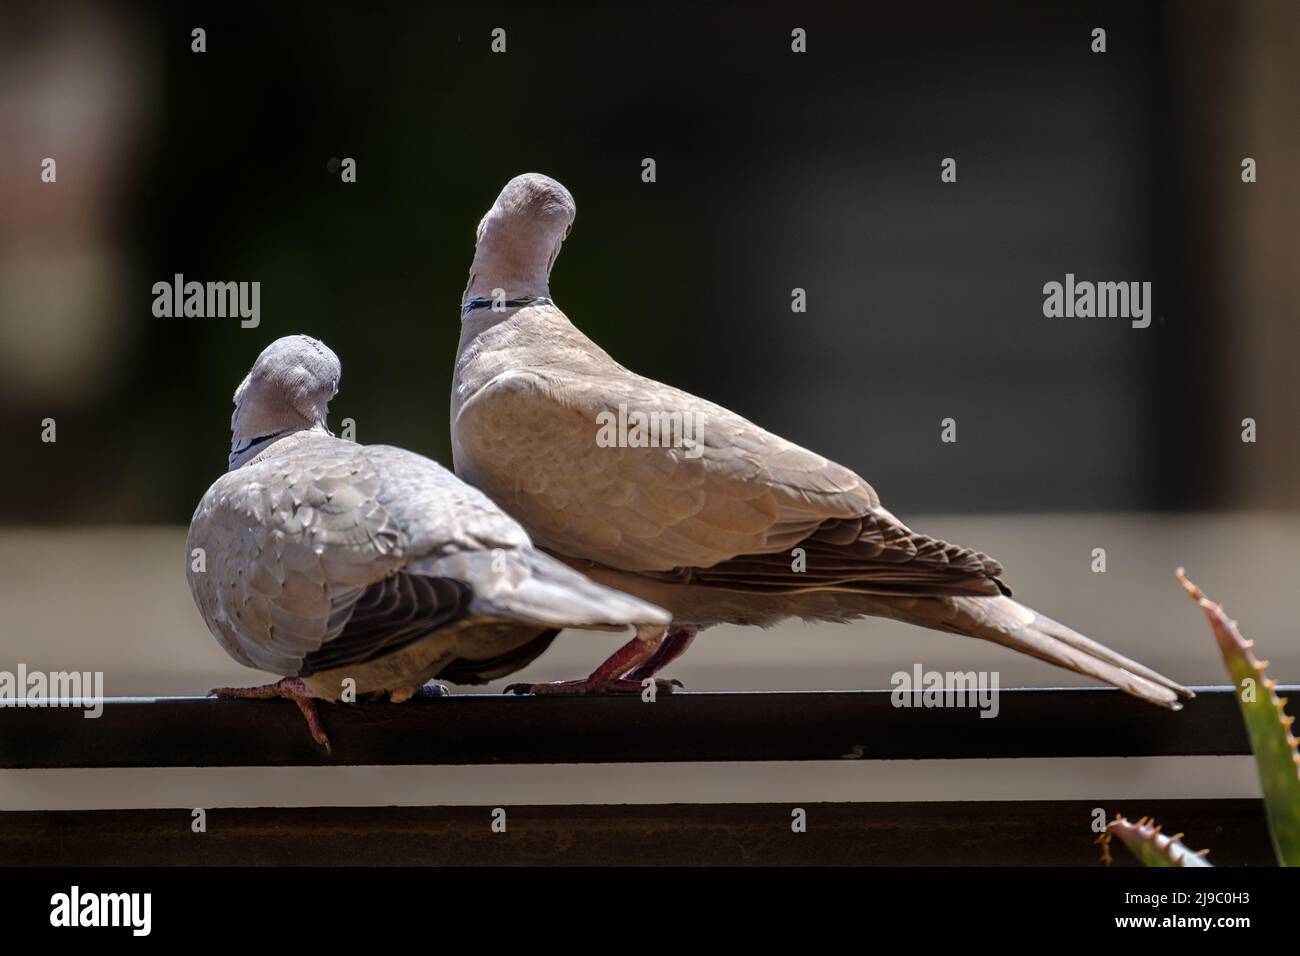 pair of doves during courtship synchronized pigeon Stock Photo